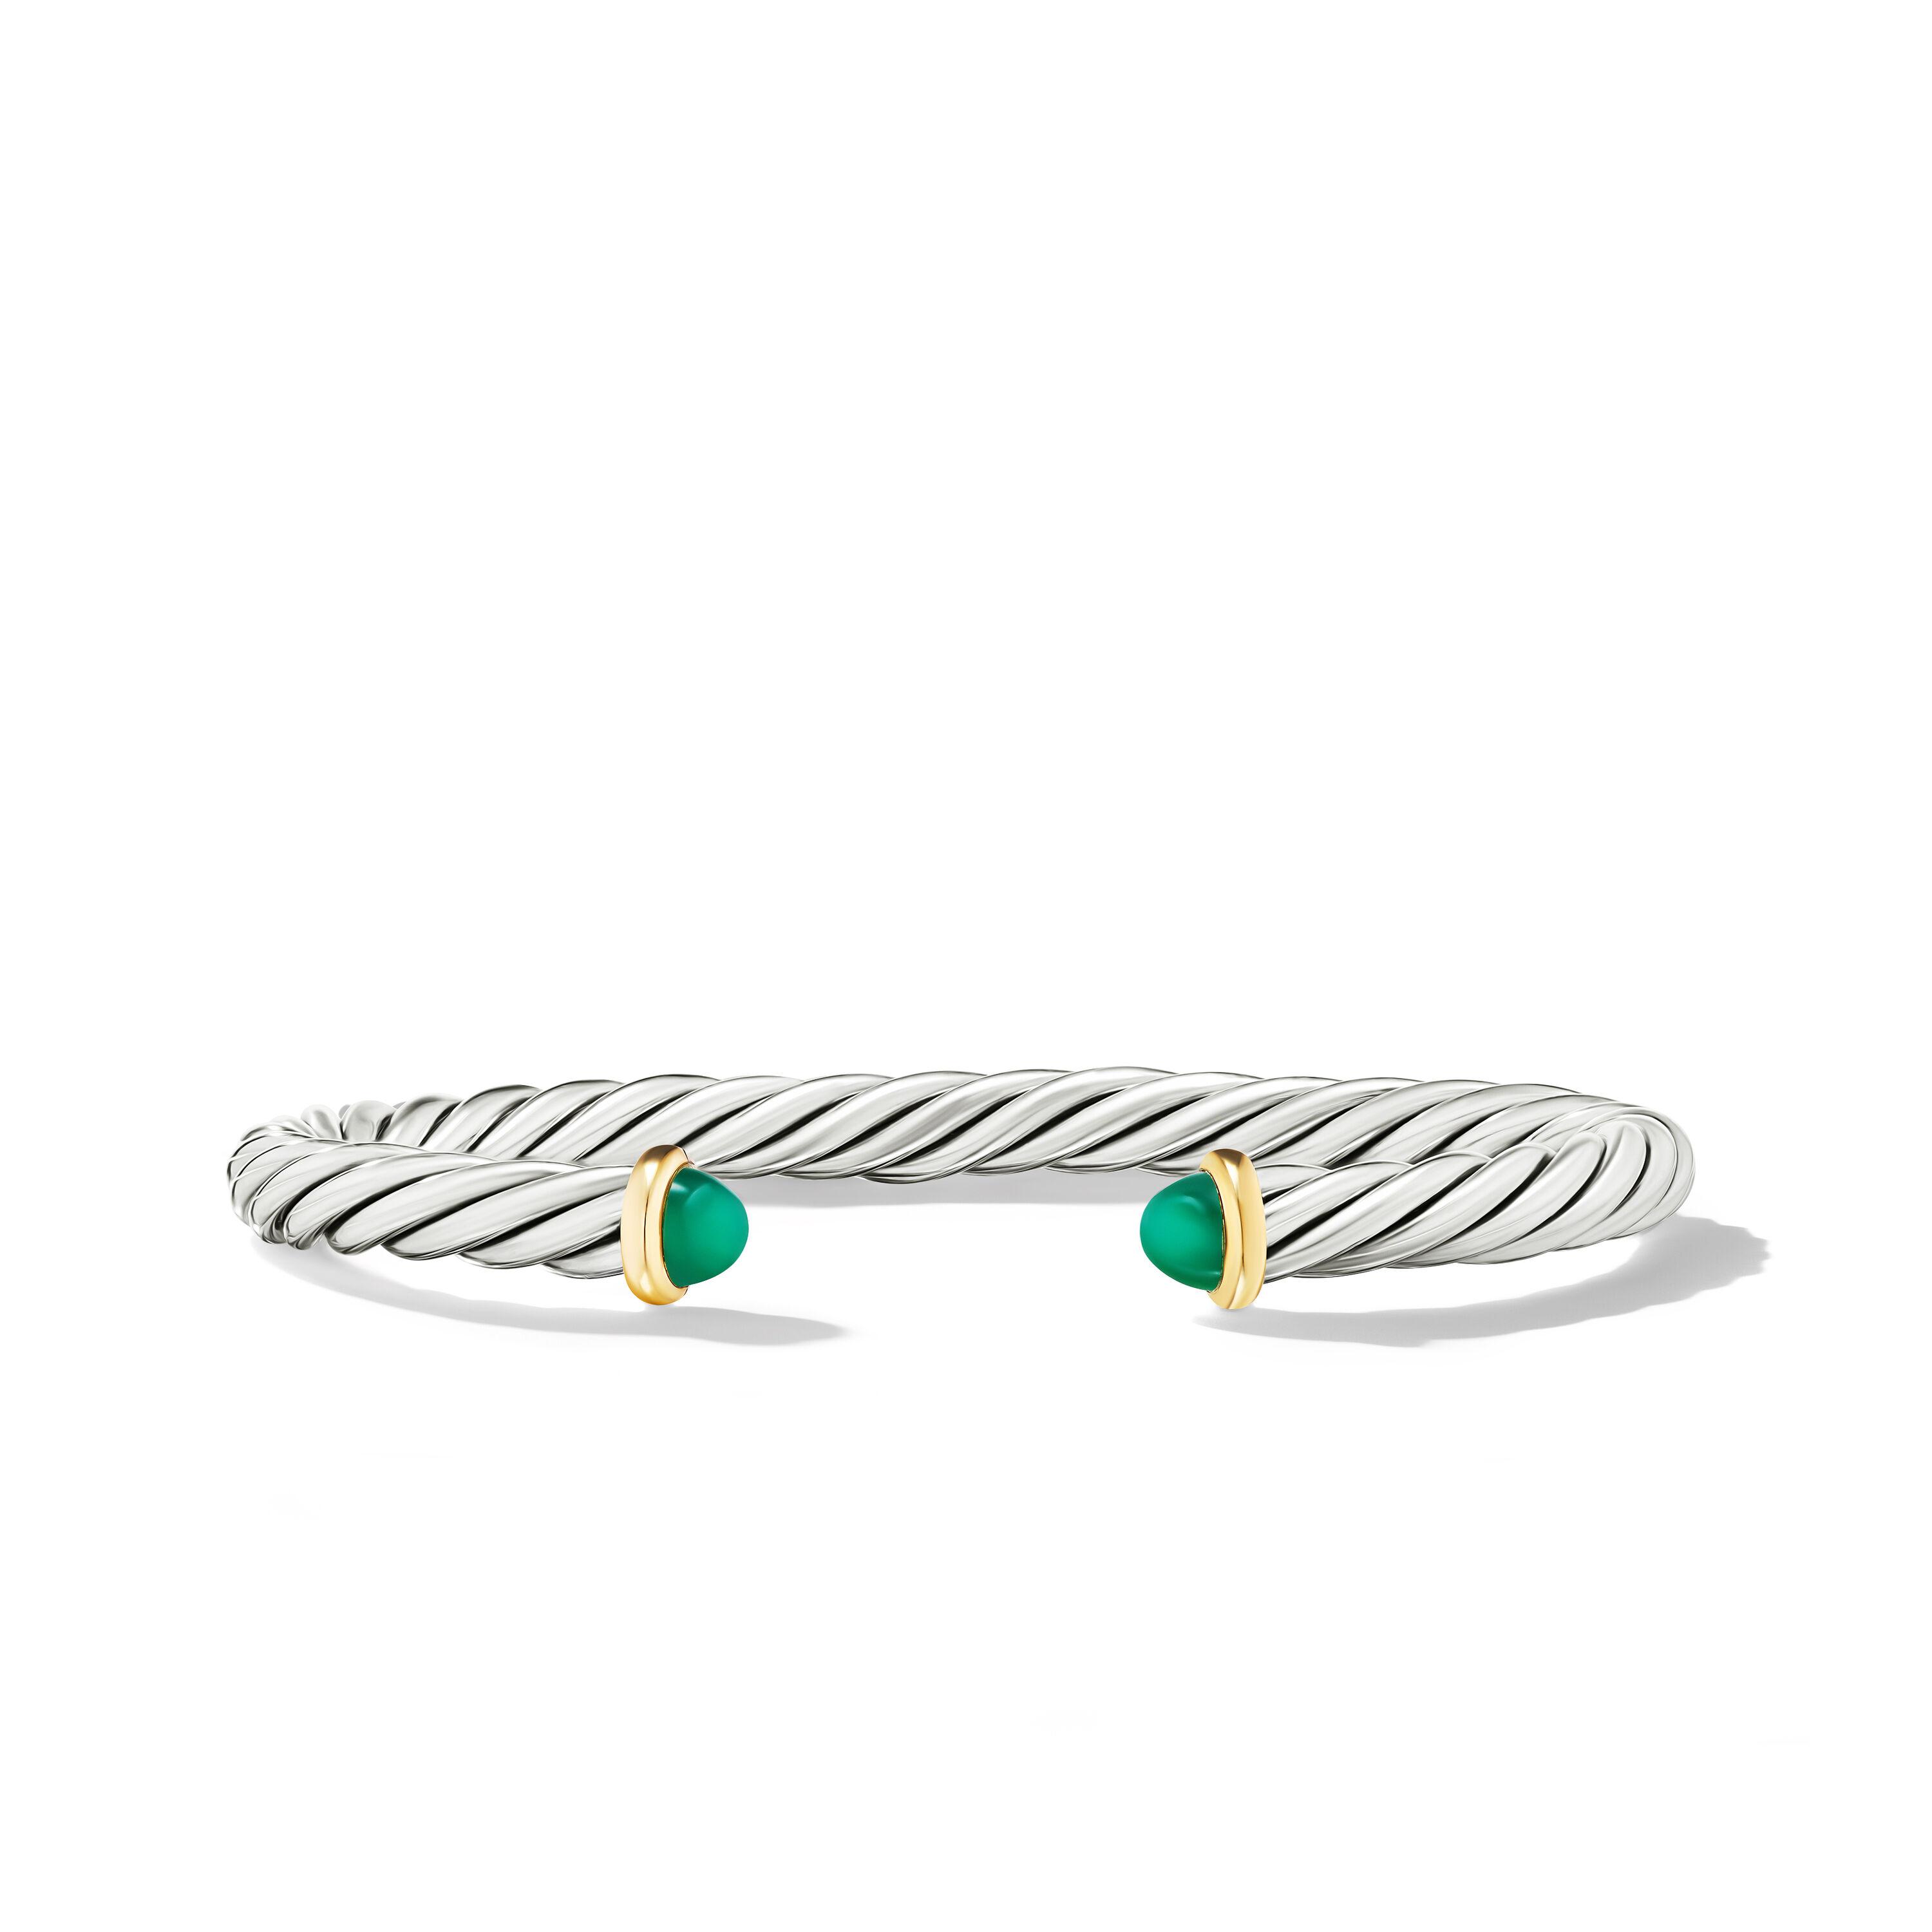 David Yurman 6mm Cable Cuff Bracelet in Sterling Silver with 14K Yellow Gold and Green Onyx, Medium 0